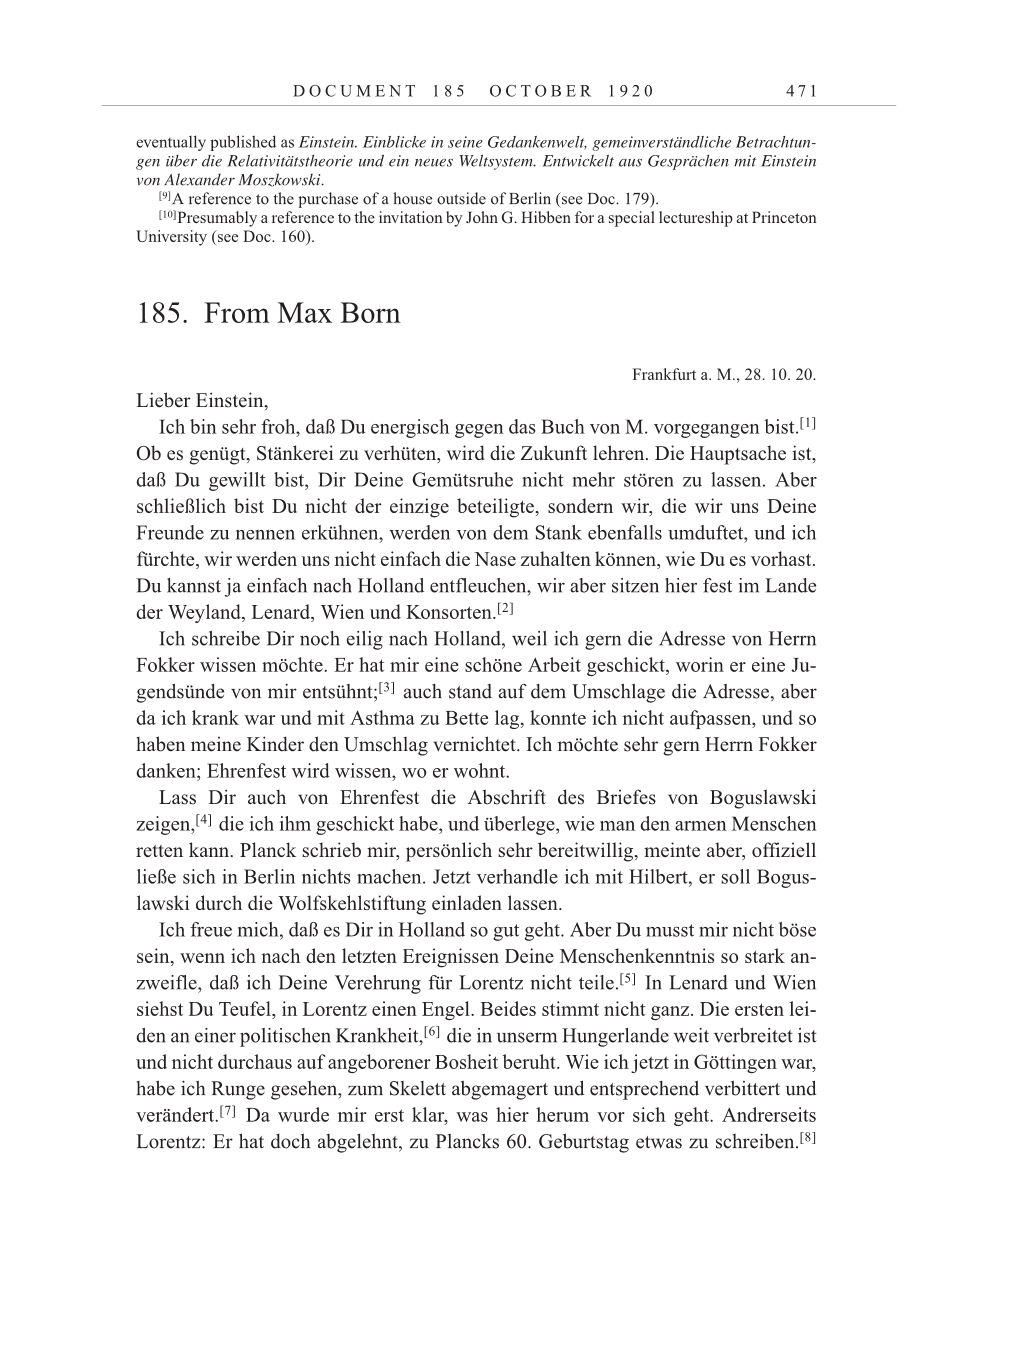 Volume 10: The Berlin Years: Correspondence May-December 1920 / Supplementary Correspondence 1909-1920 page 471